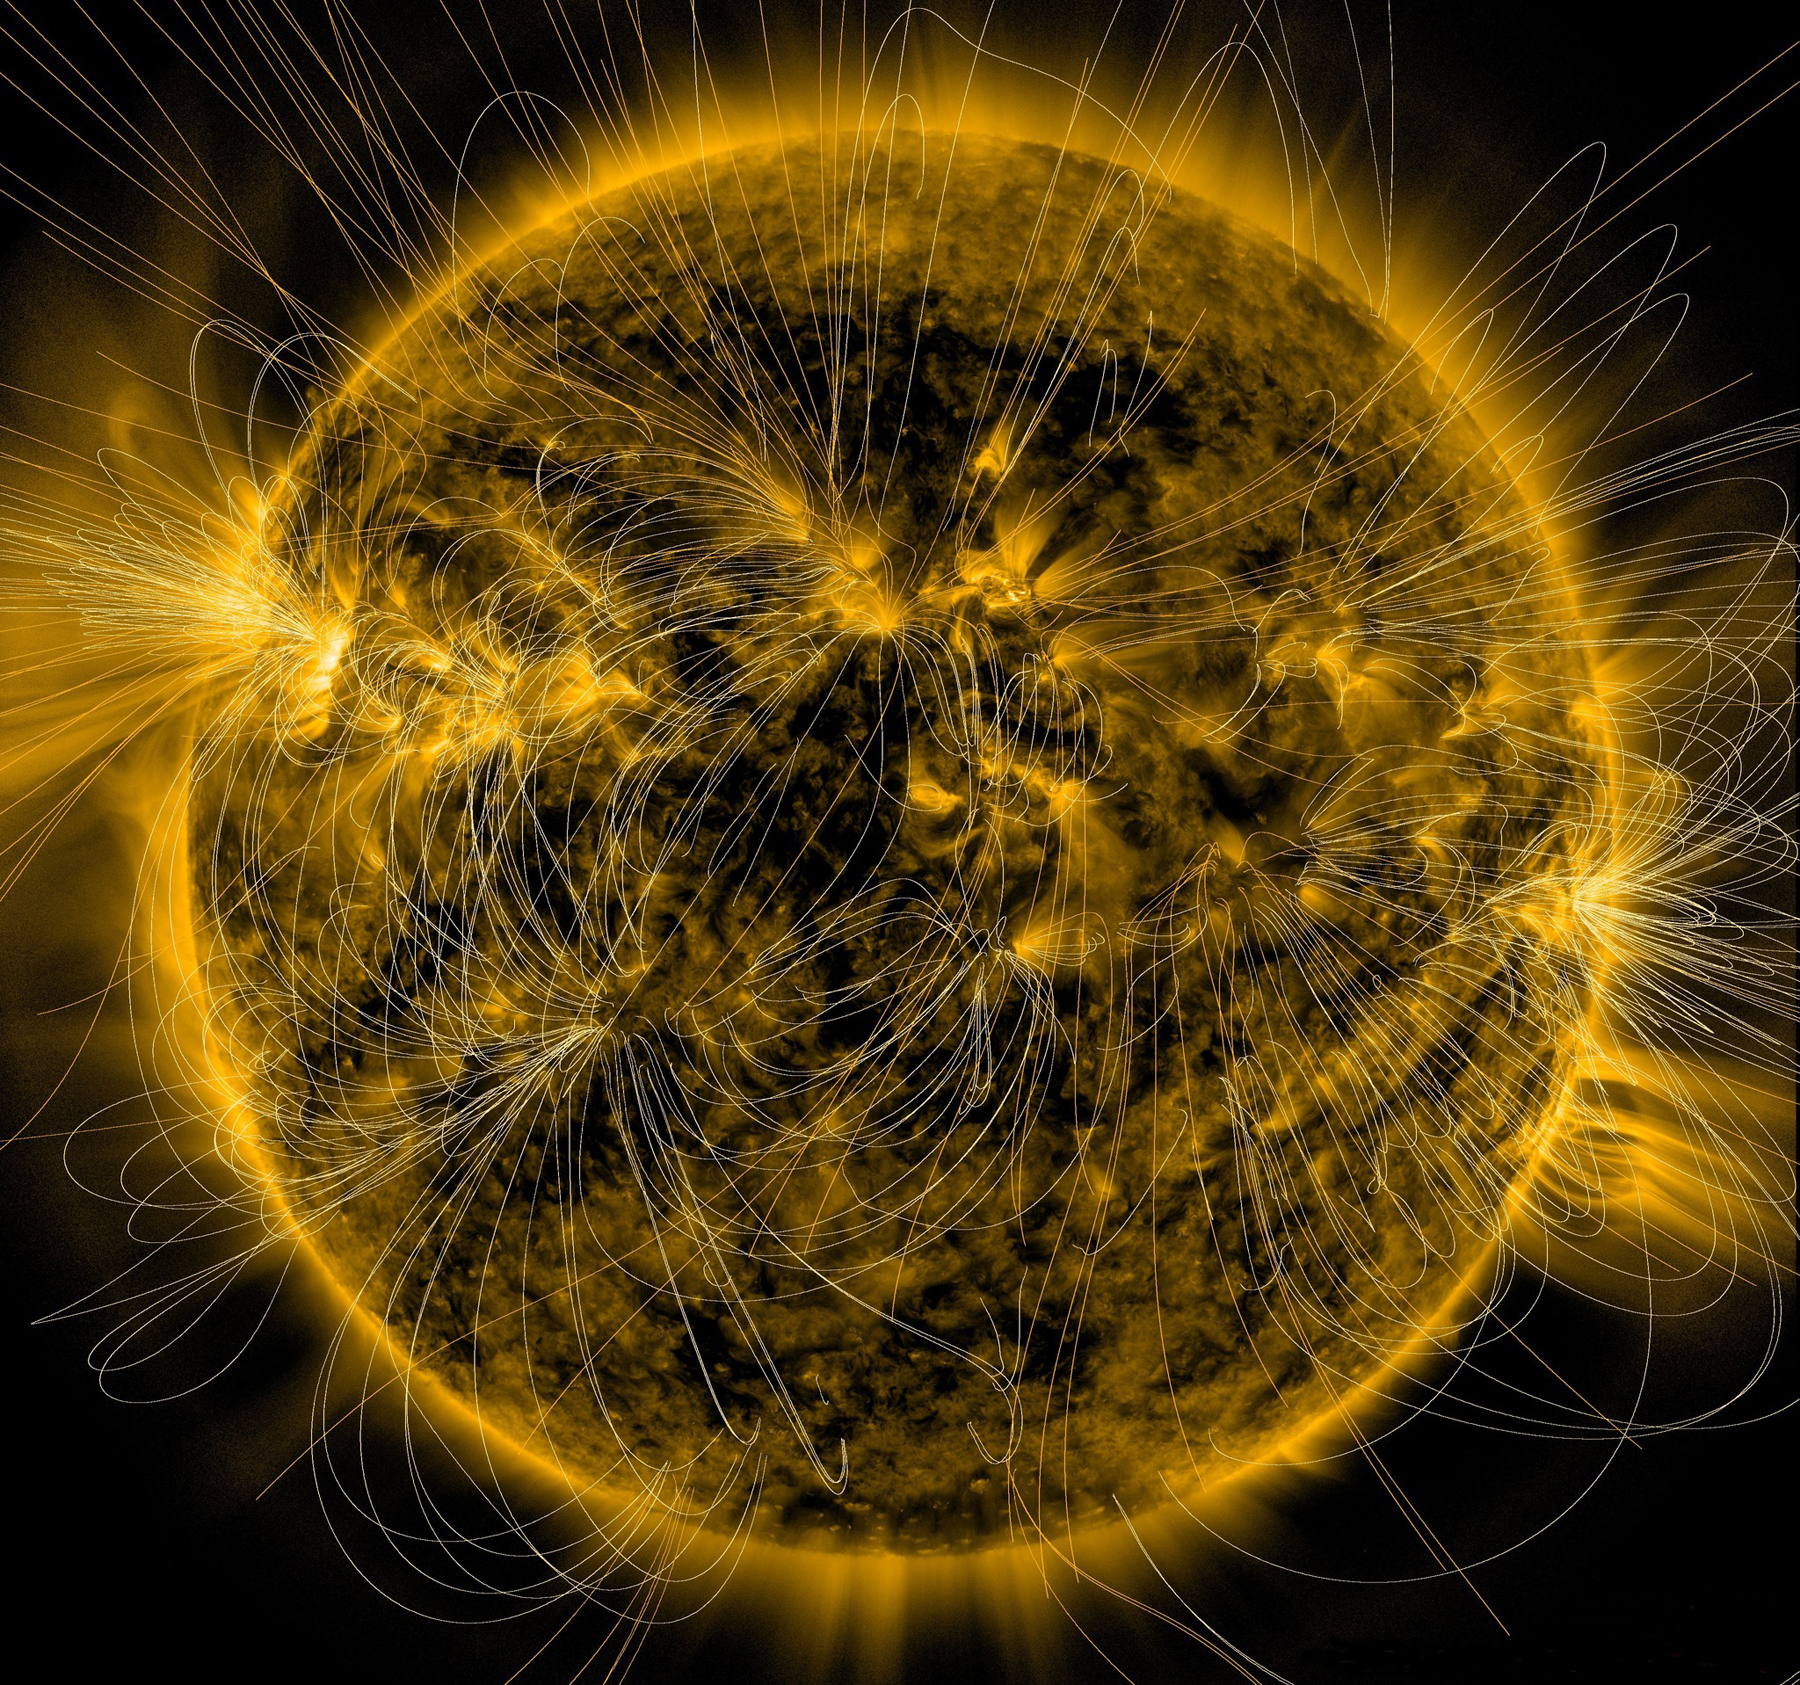 SDO image of sun superimposed with an illustration of magnetic field lines